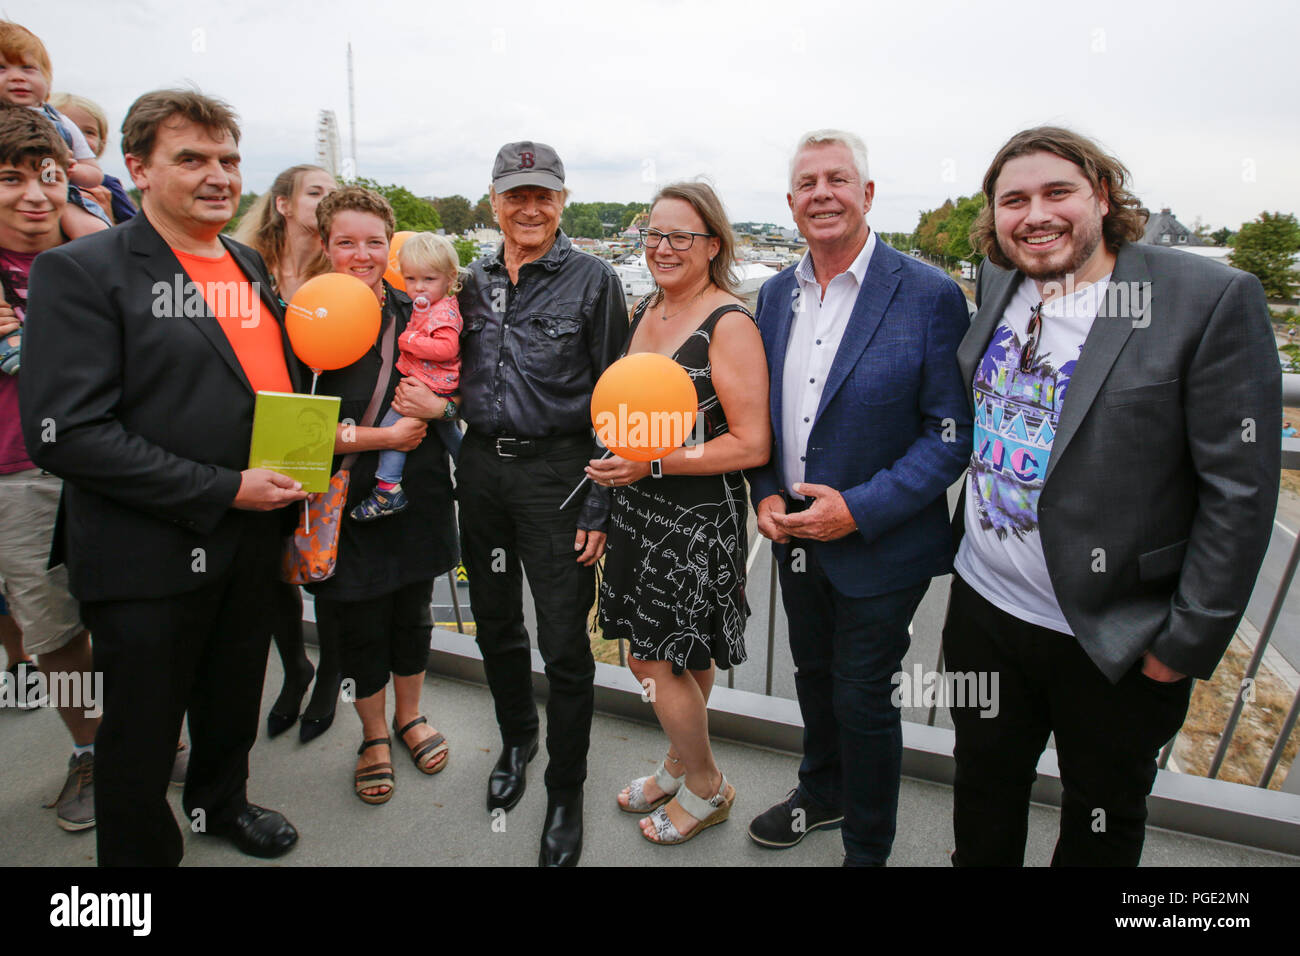 Actor Peter Englert (right), who initiated the renaming of the bridge to Terence-Hill-Bridge, Terence Hill (4th right) and the Lord Mayor of Worms Michael Kissel (2nd right) pose with members of the Karl-Kubel-Foundation for the press. Italian actor Terence Hill visited the German city of Worms, to present his new movie (My Name is somebody). Terence Hill added the stop in Worms to his movie promotion tour in Germany, to visit a pedestrian bridge, that is unofficially named Terence-Hill-Bridge (officially Karl-Kubel-Bridge). (Photo by Michael Debets/Pacific Press) Stock Photo